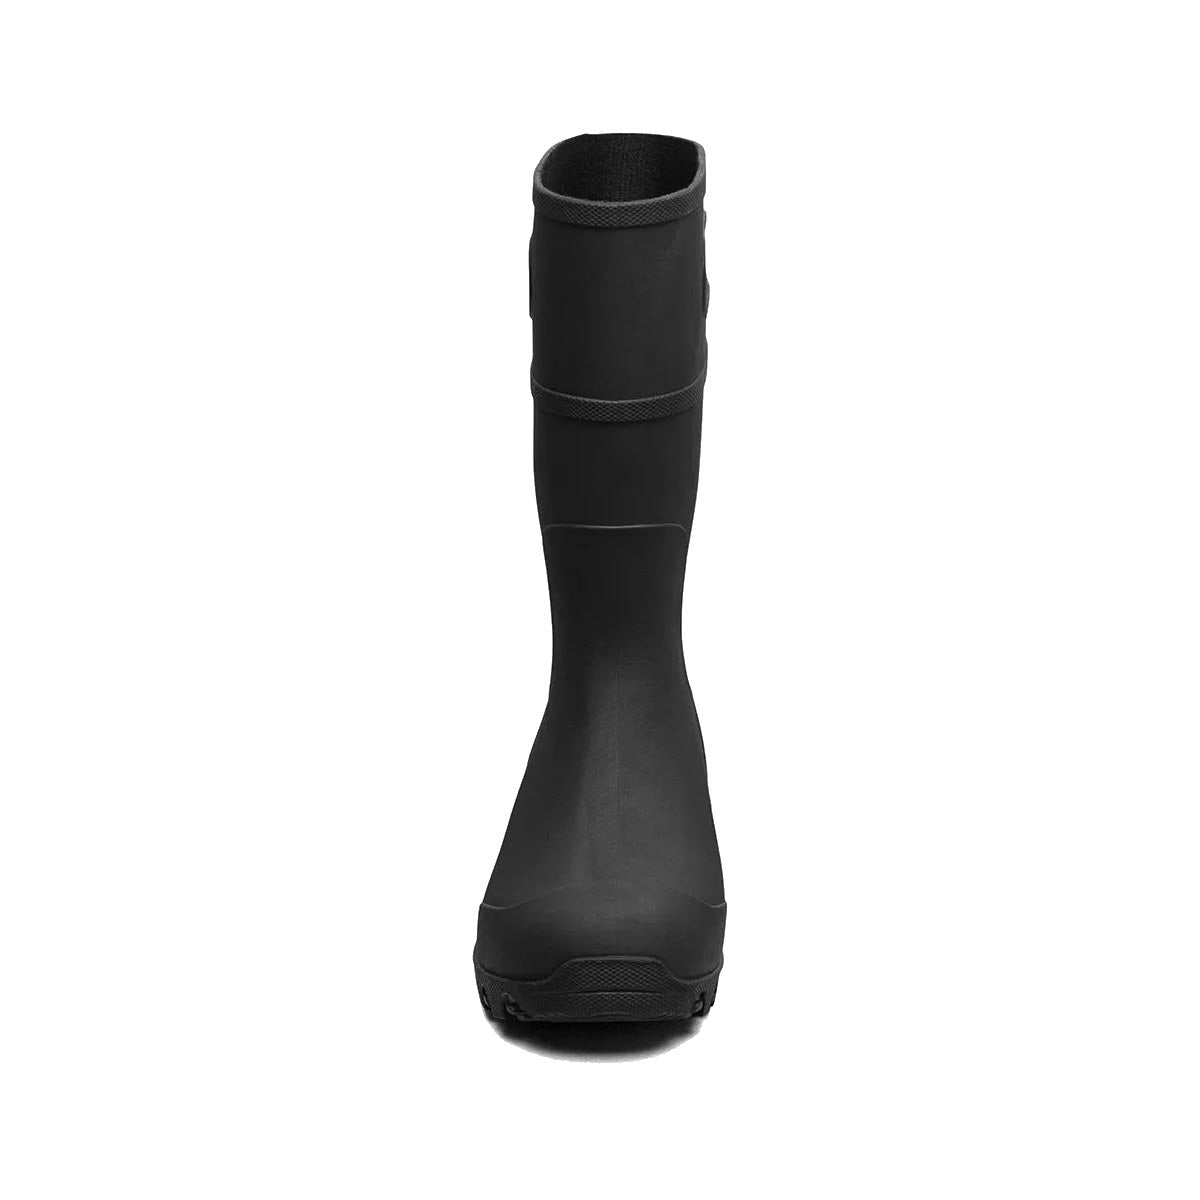 Bogs Essential Rain Tall Black - Kids rubber boot with space-age seamless construction, isolated on a white background, viewed from the front.